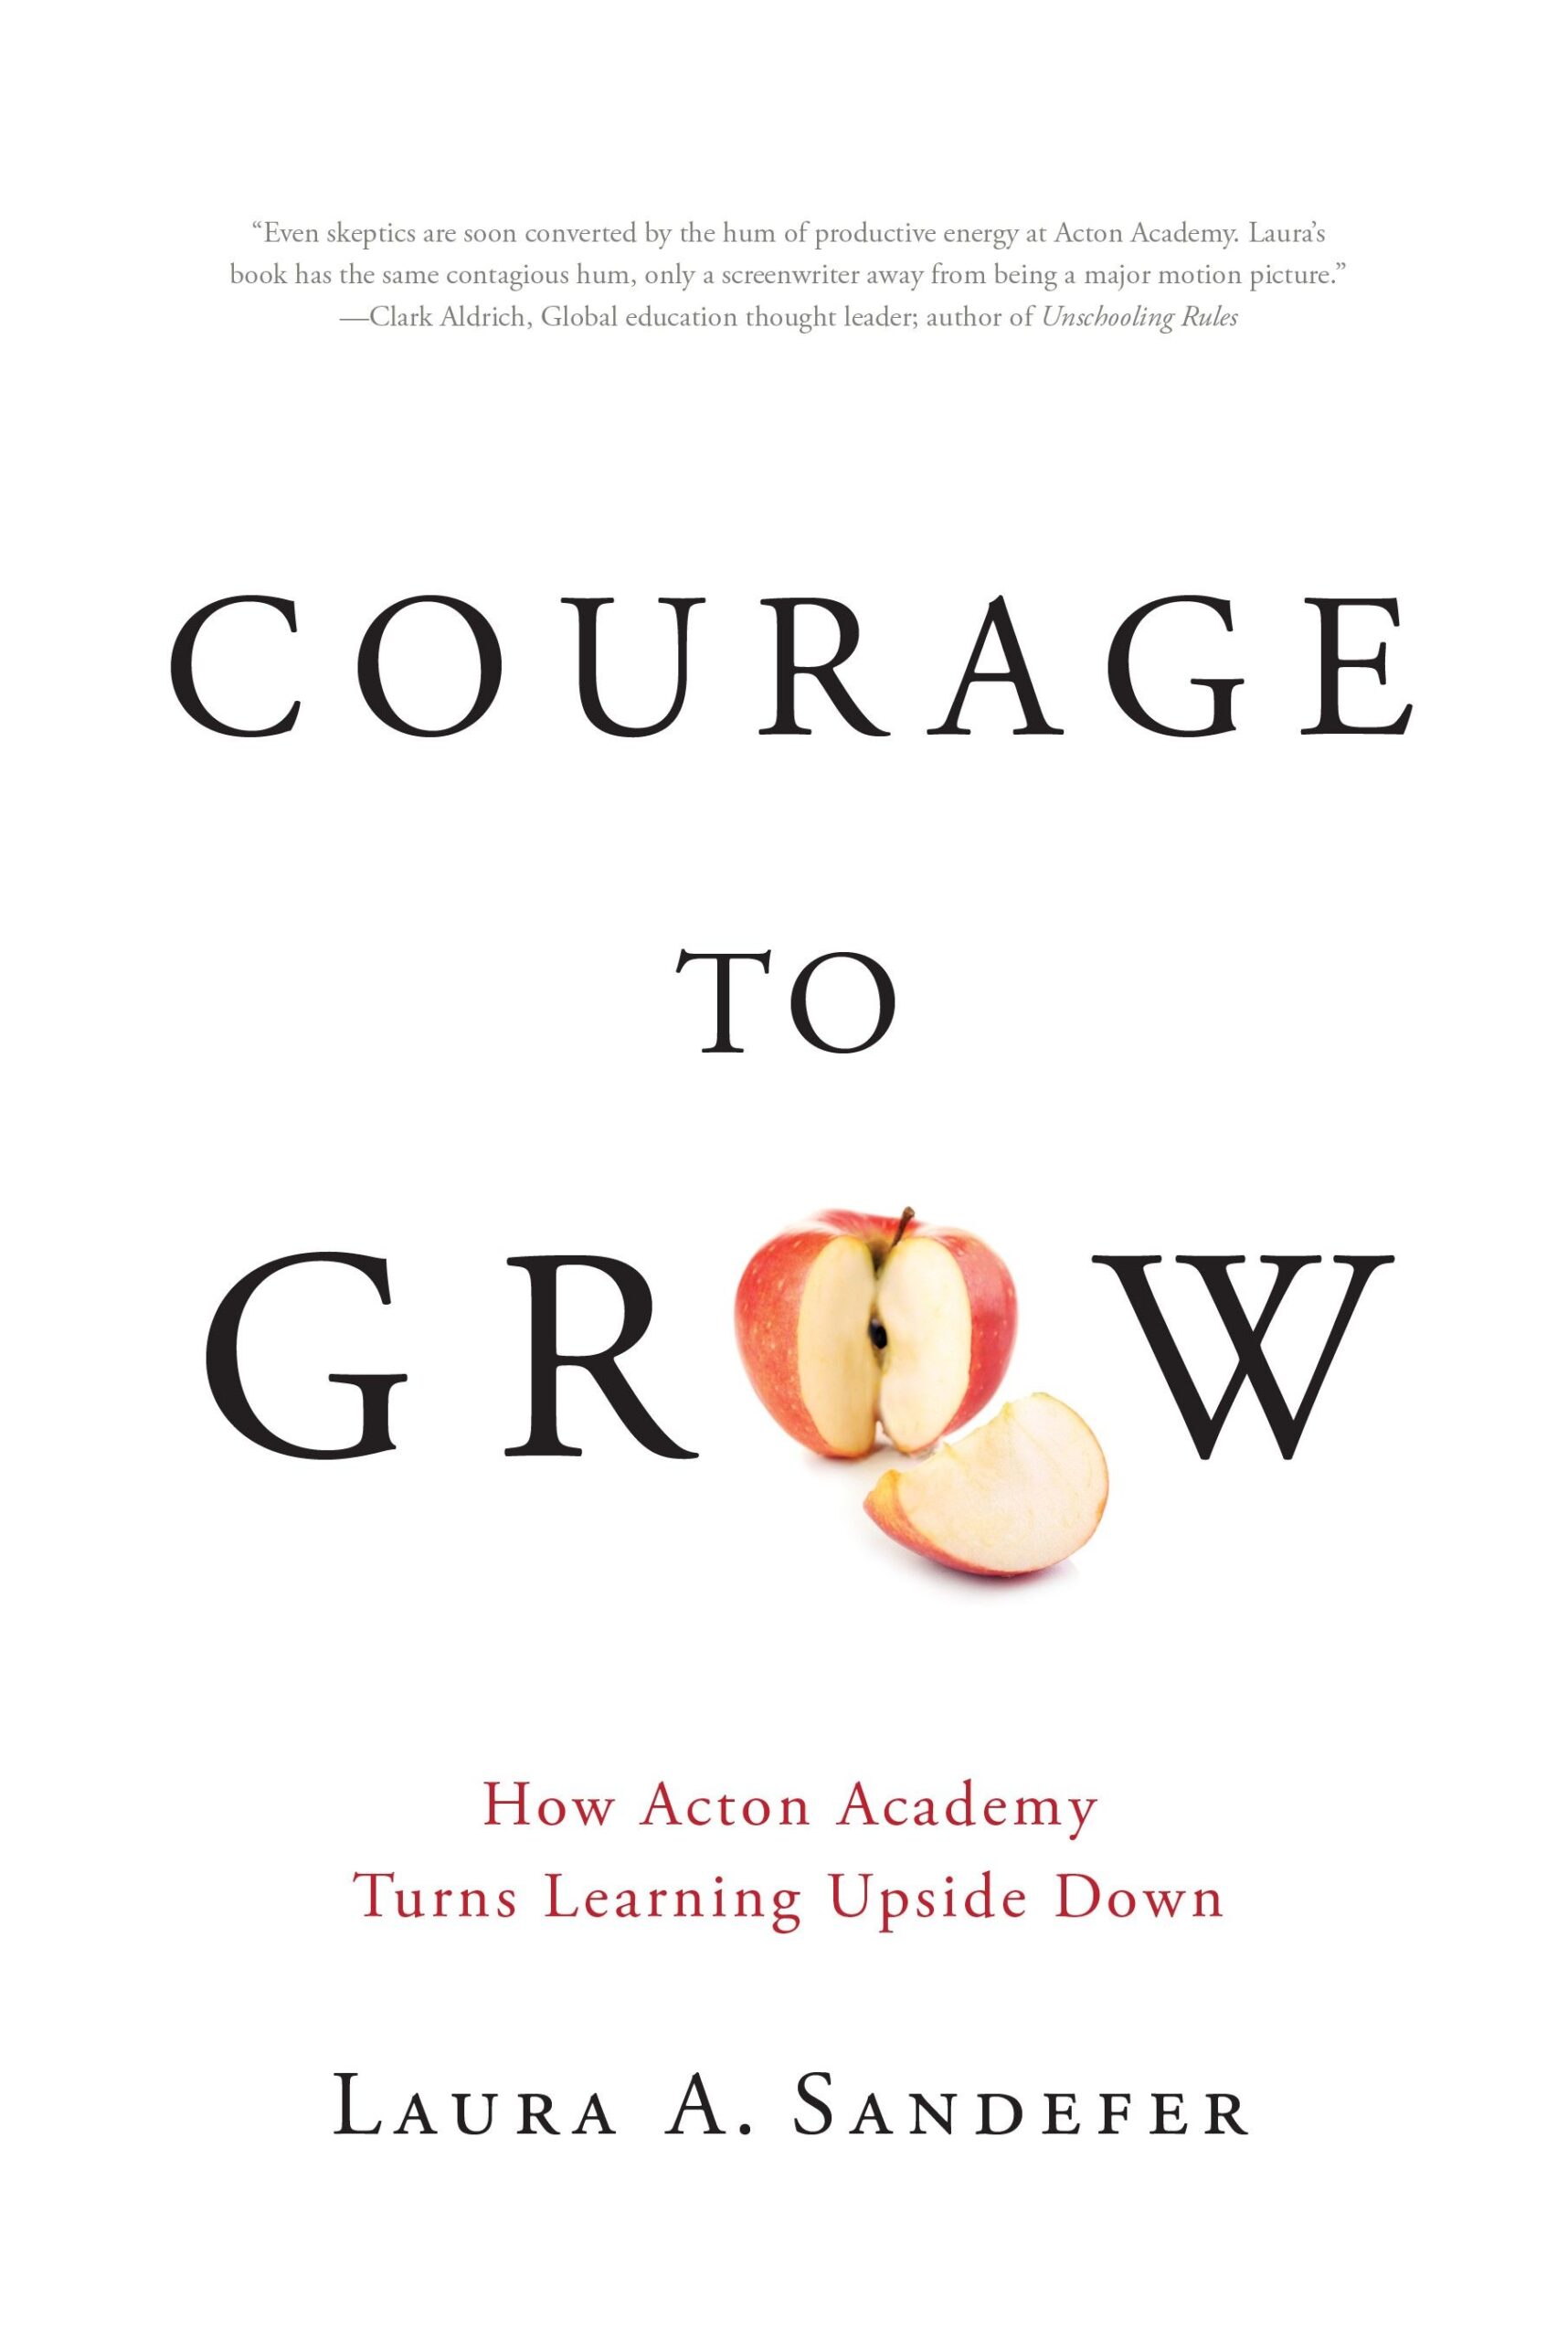 courage to grow - how acton academy turns learning upside down